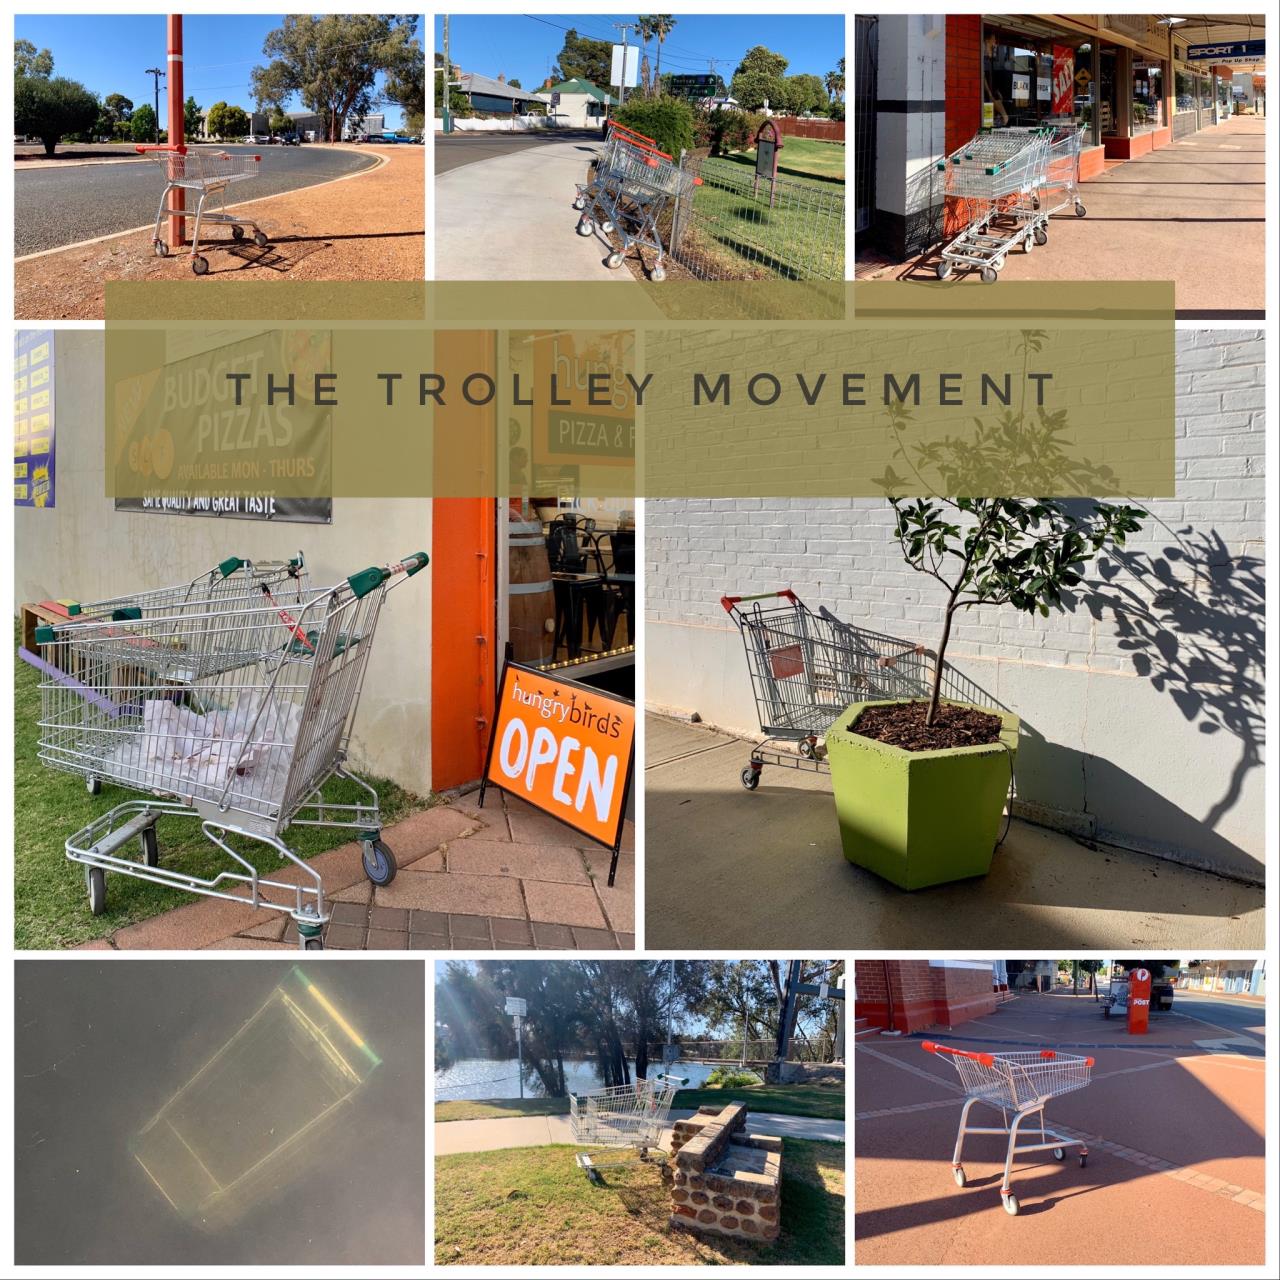 The Trolley Movement